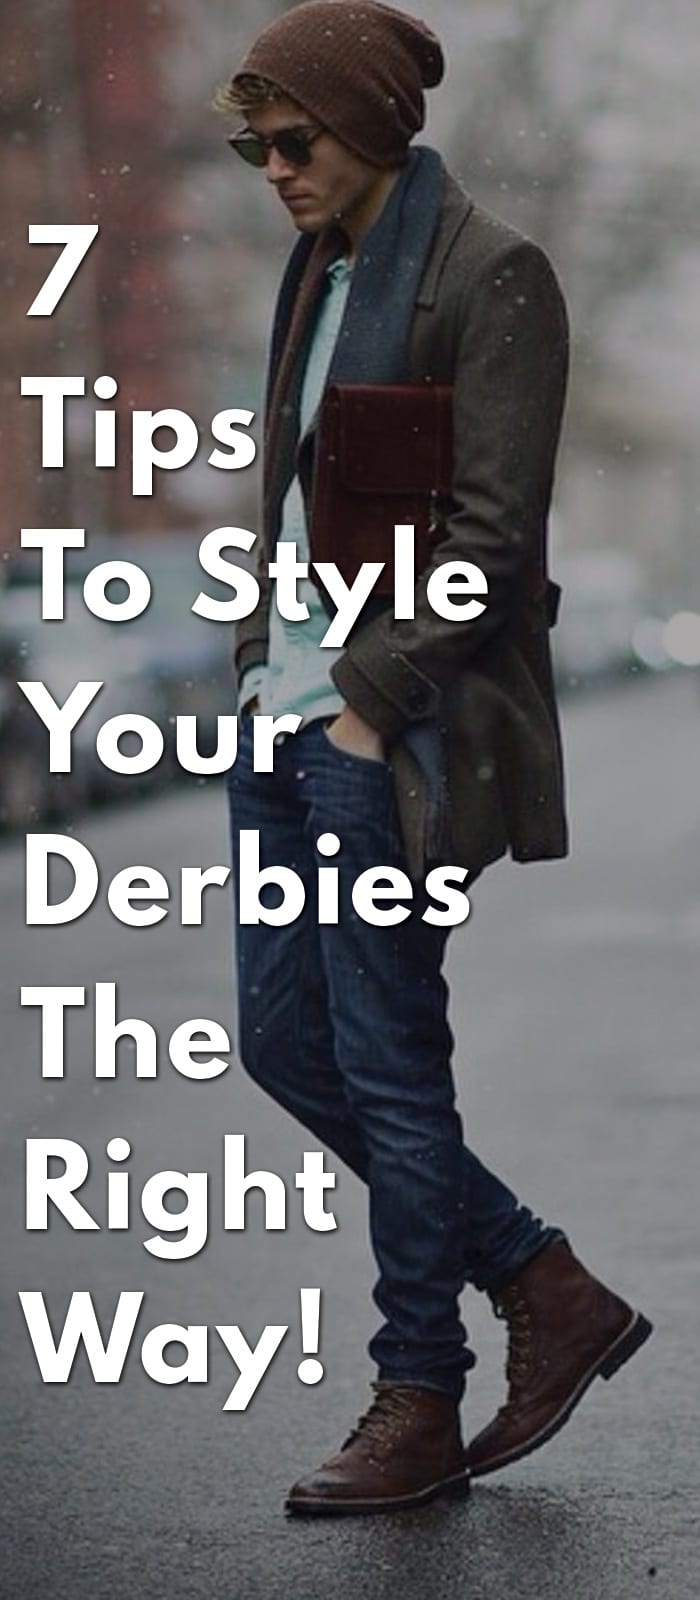 7-Tips-To-Style-Your-Derbies-The-Right-Way!